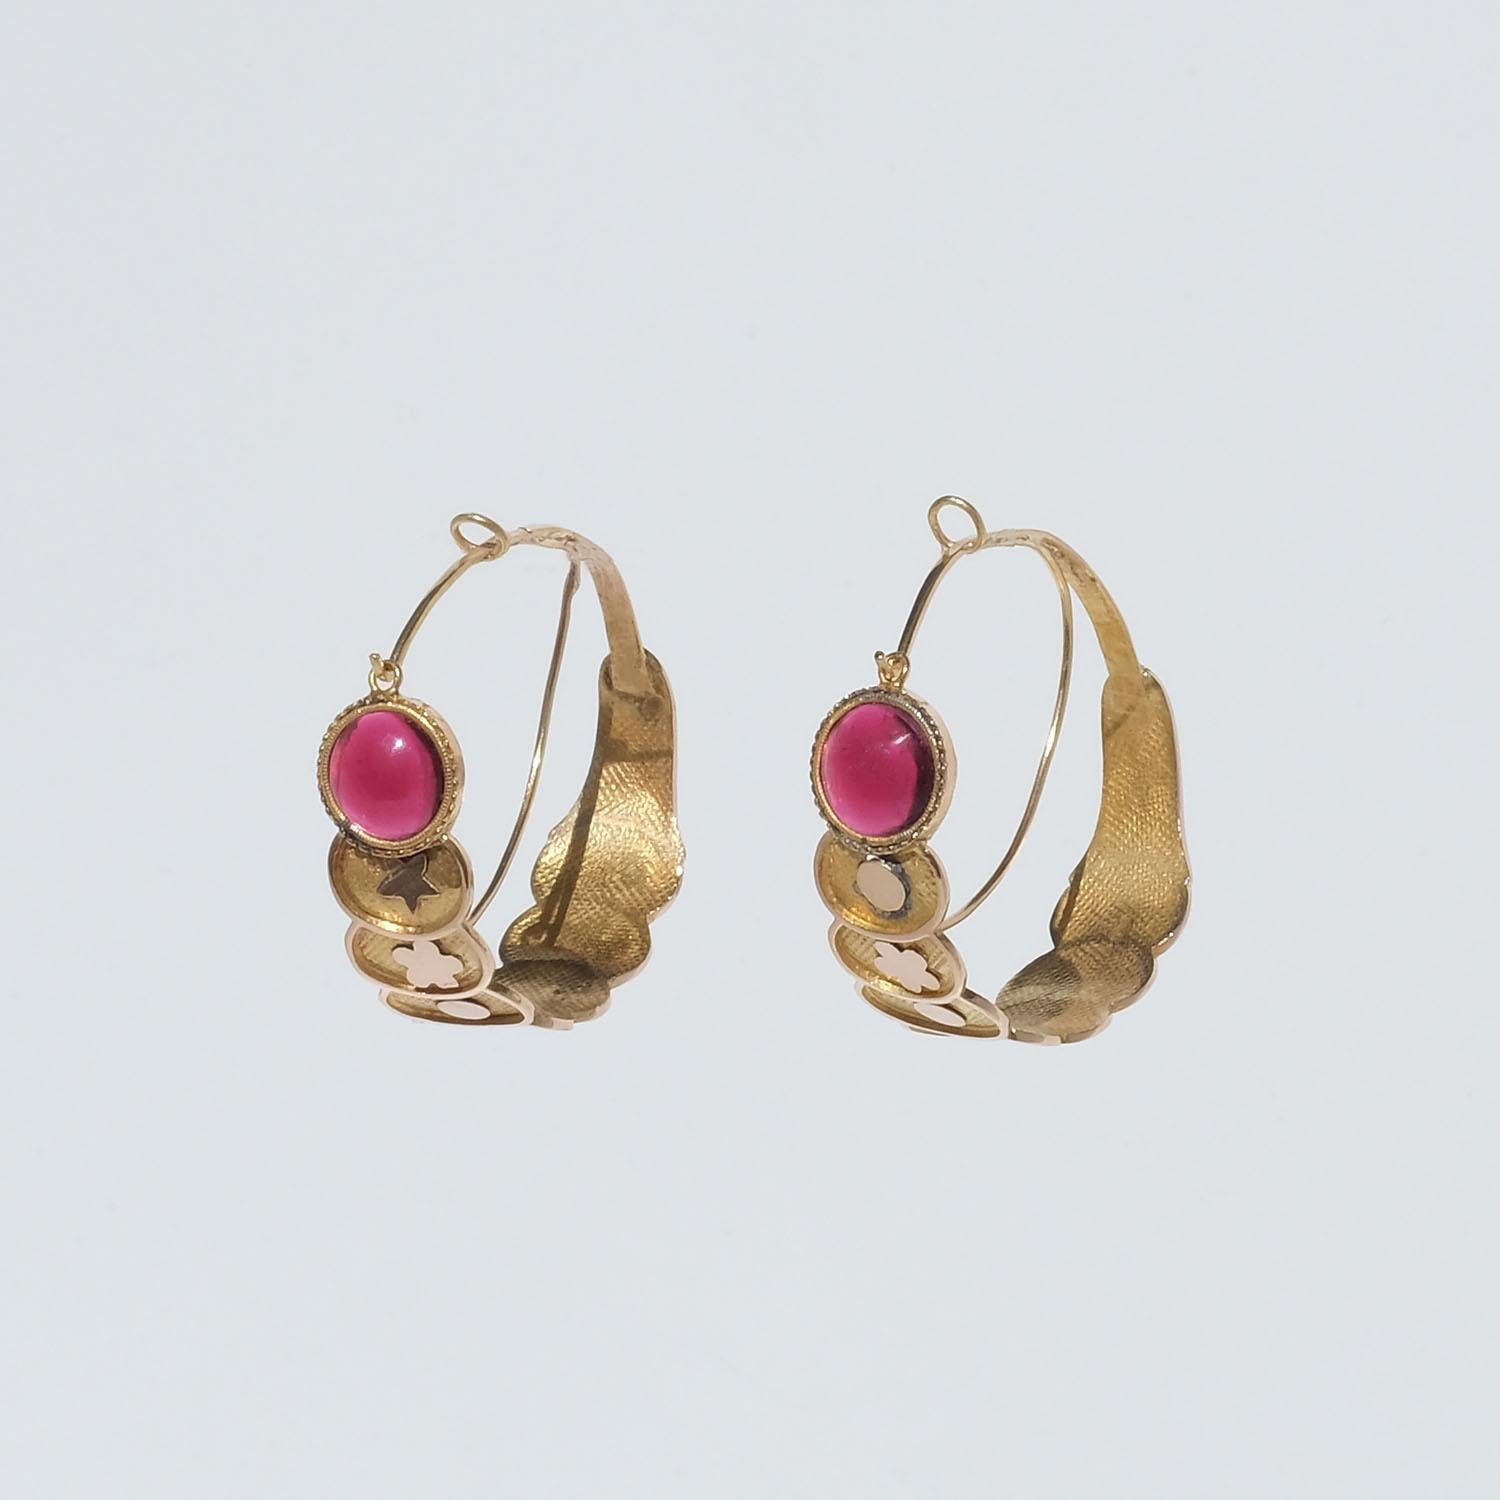 Empire 18k Gold Creole Earrings Made 1810-1820 in Sweden